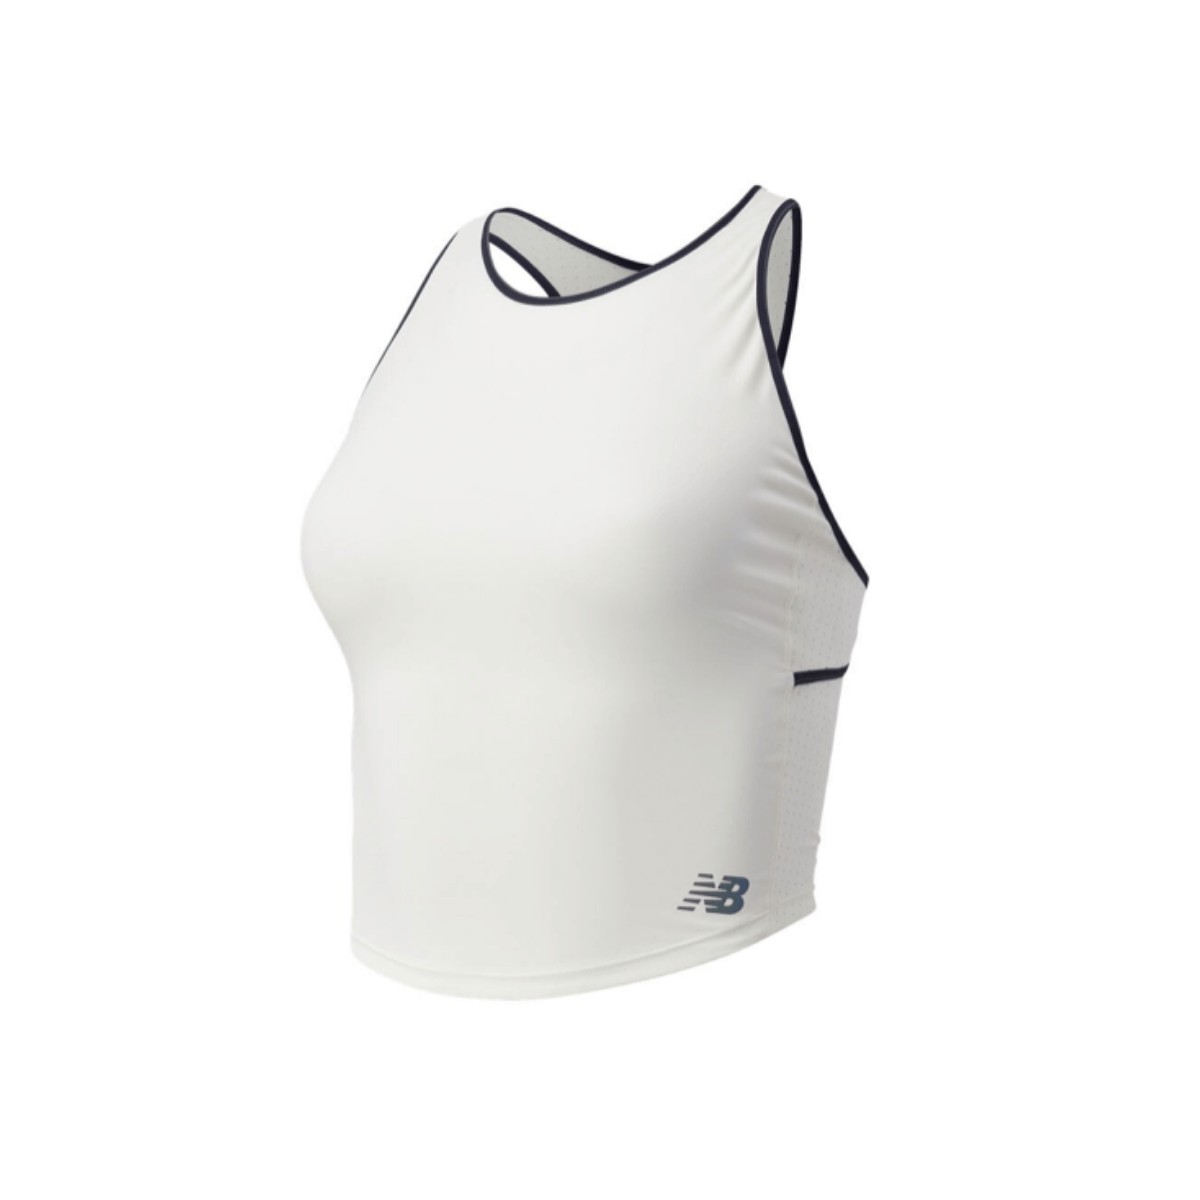 Top New Balance Speed Fuel Fashion Blanc Femme, Taille XS.